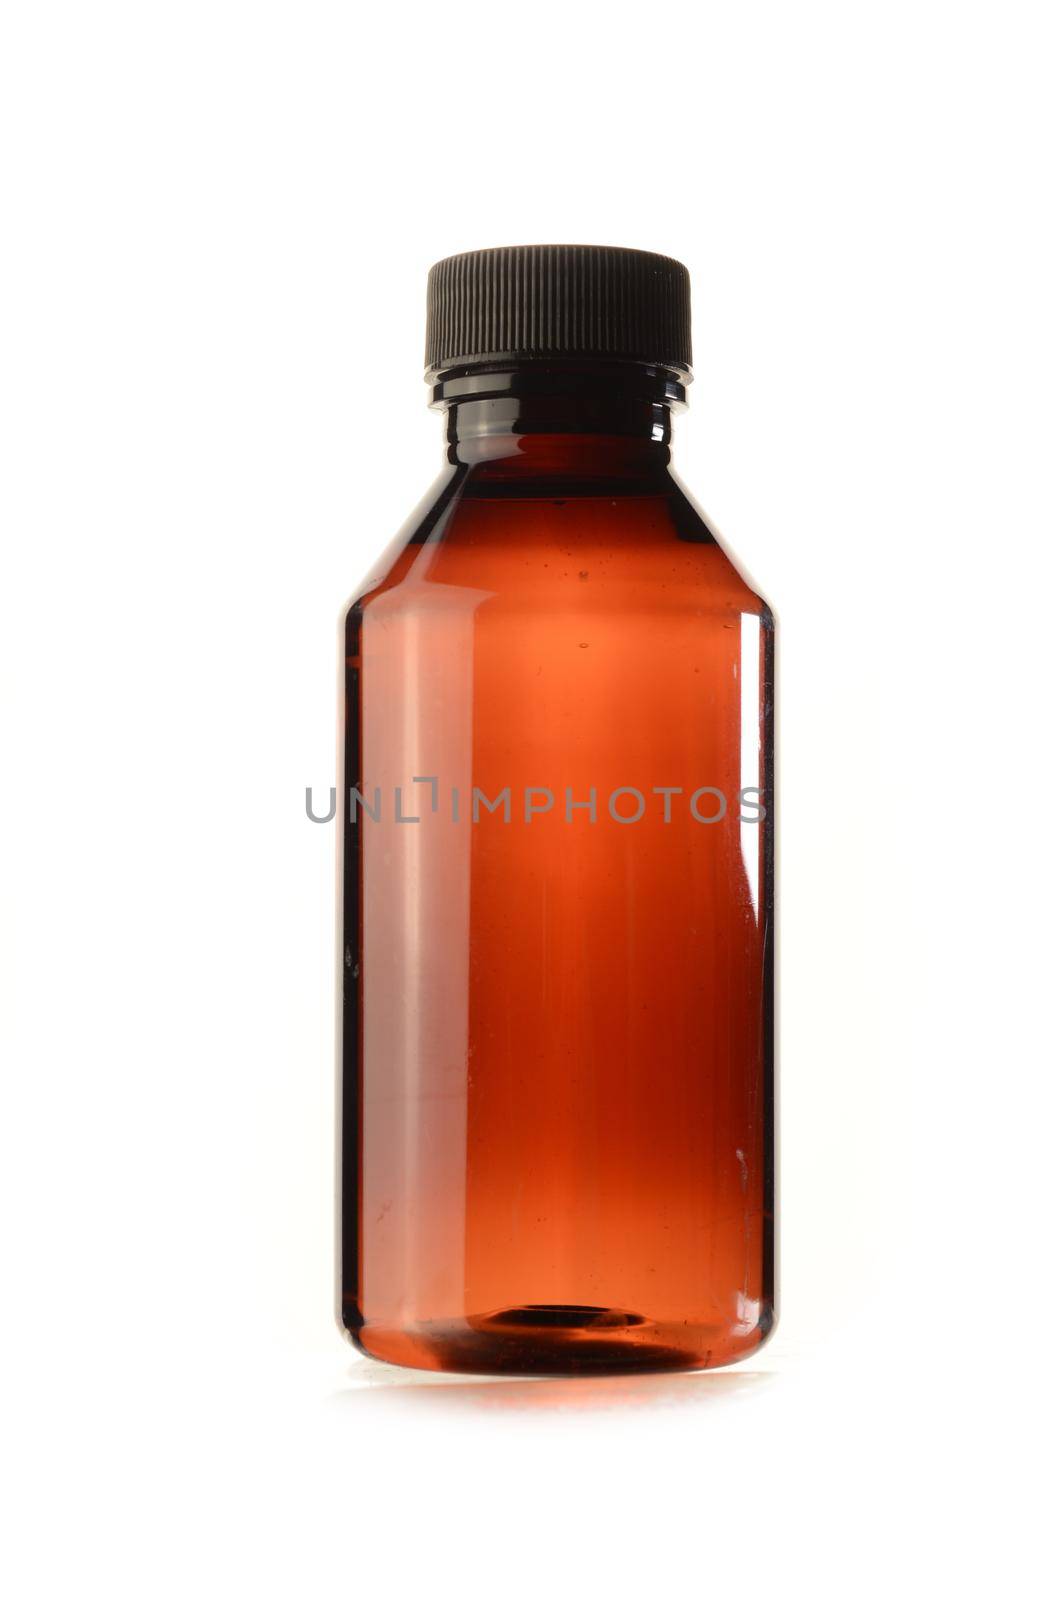 An isolated medicine bottle over a white background.